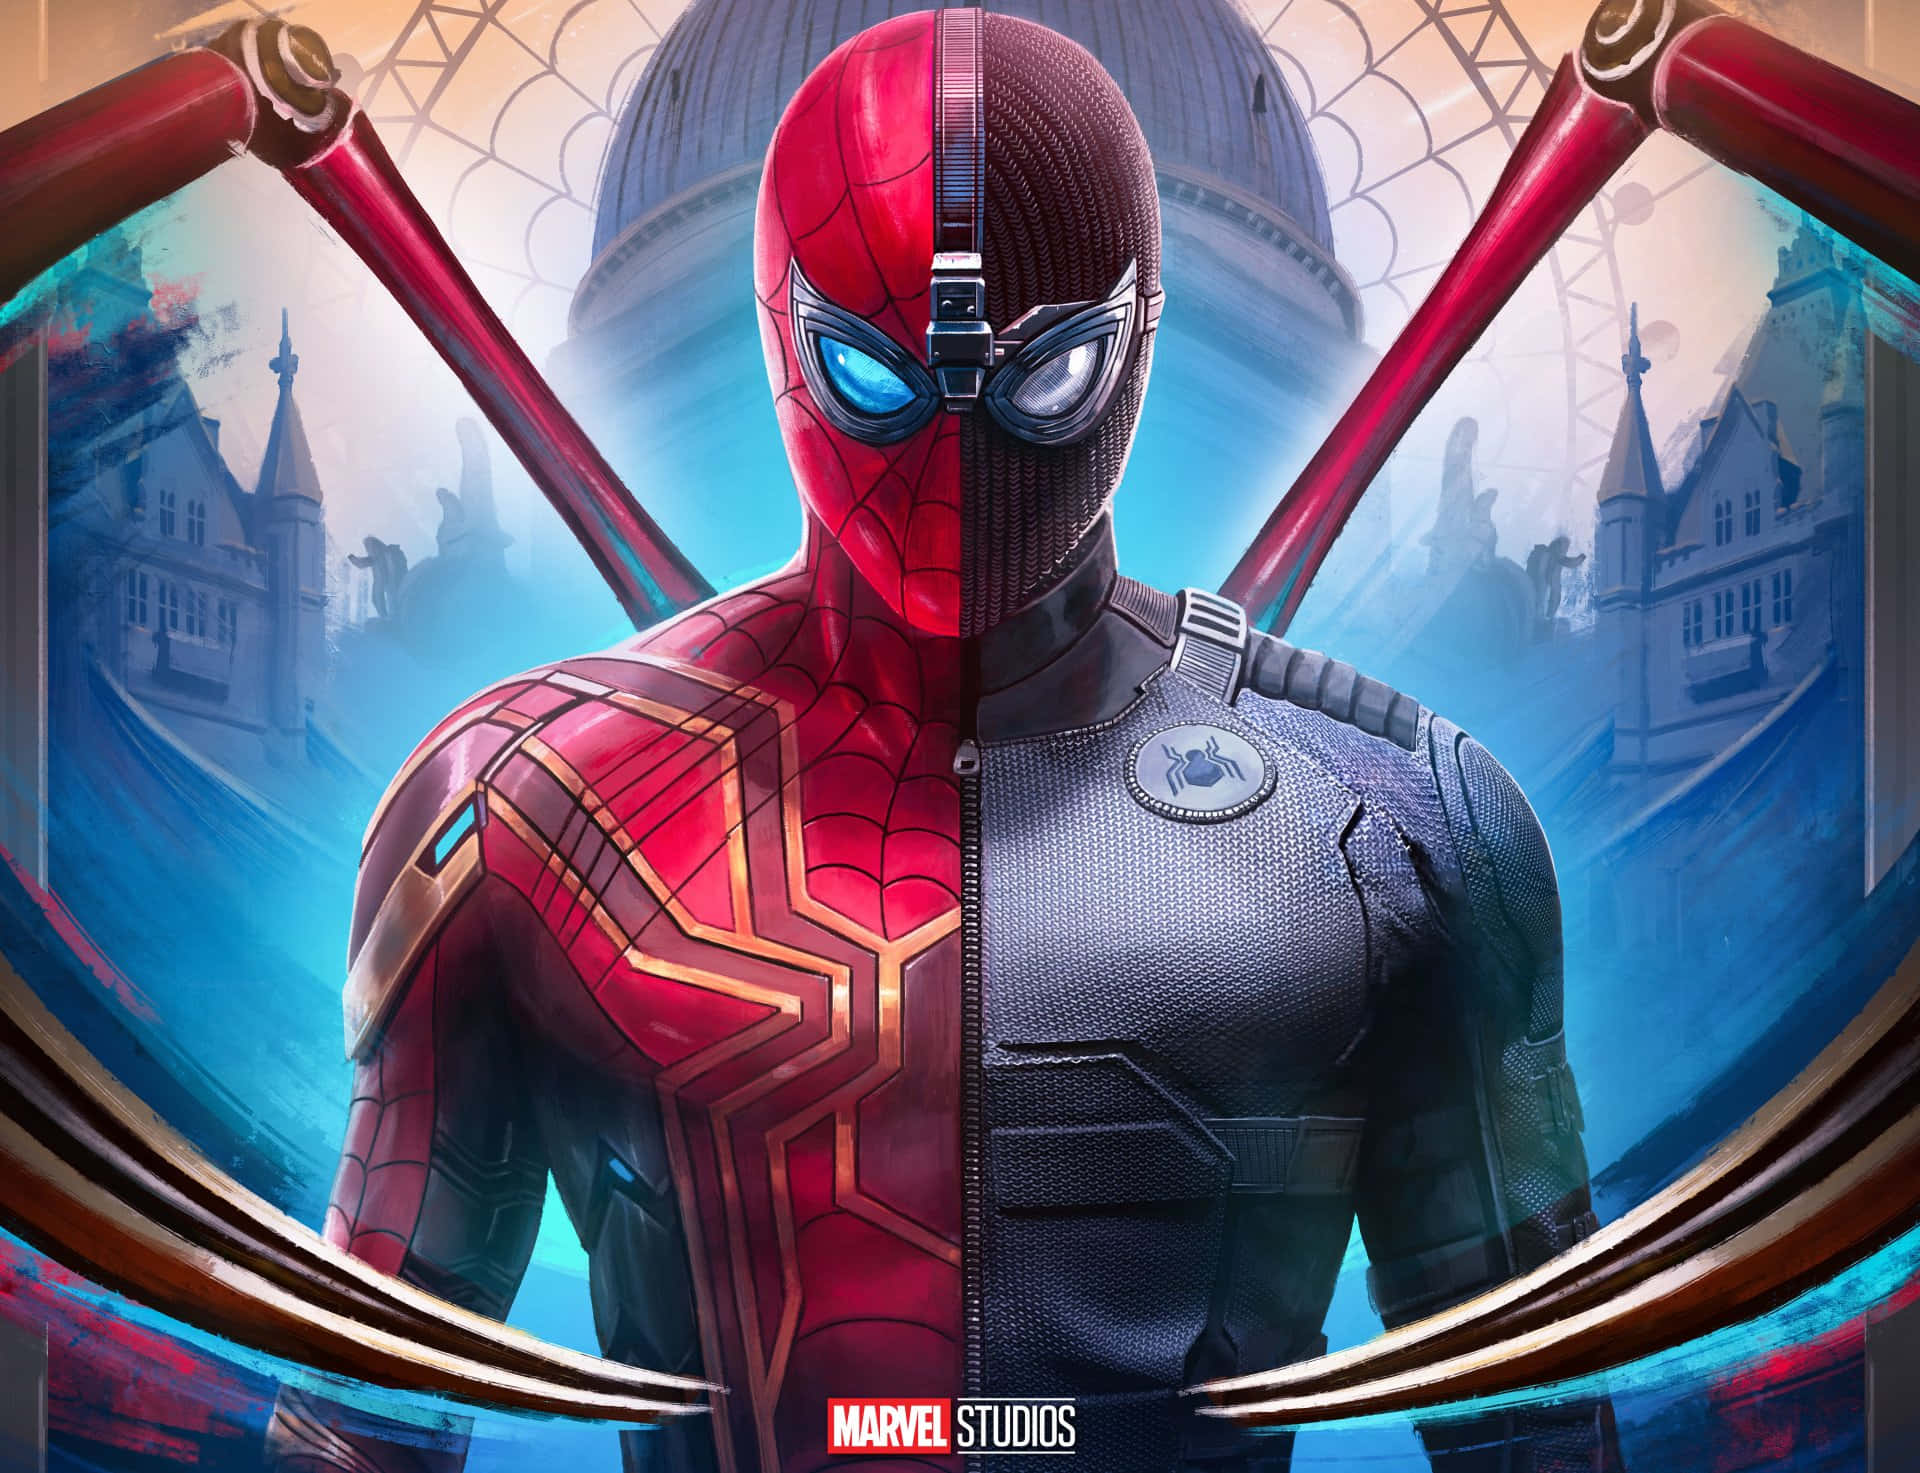 Spider Man is looking cool and collected. Wallpaper